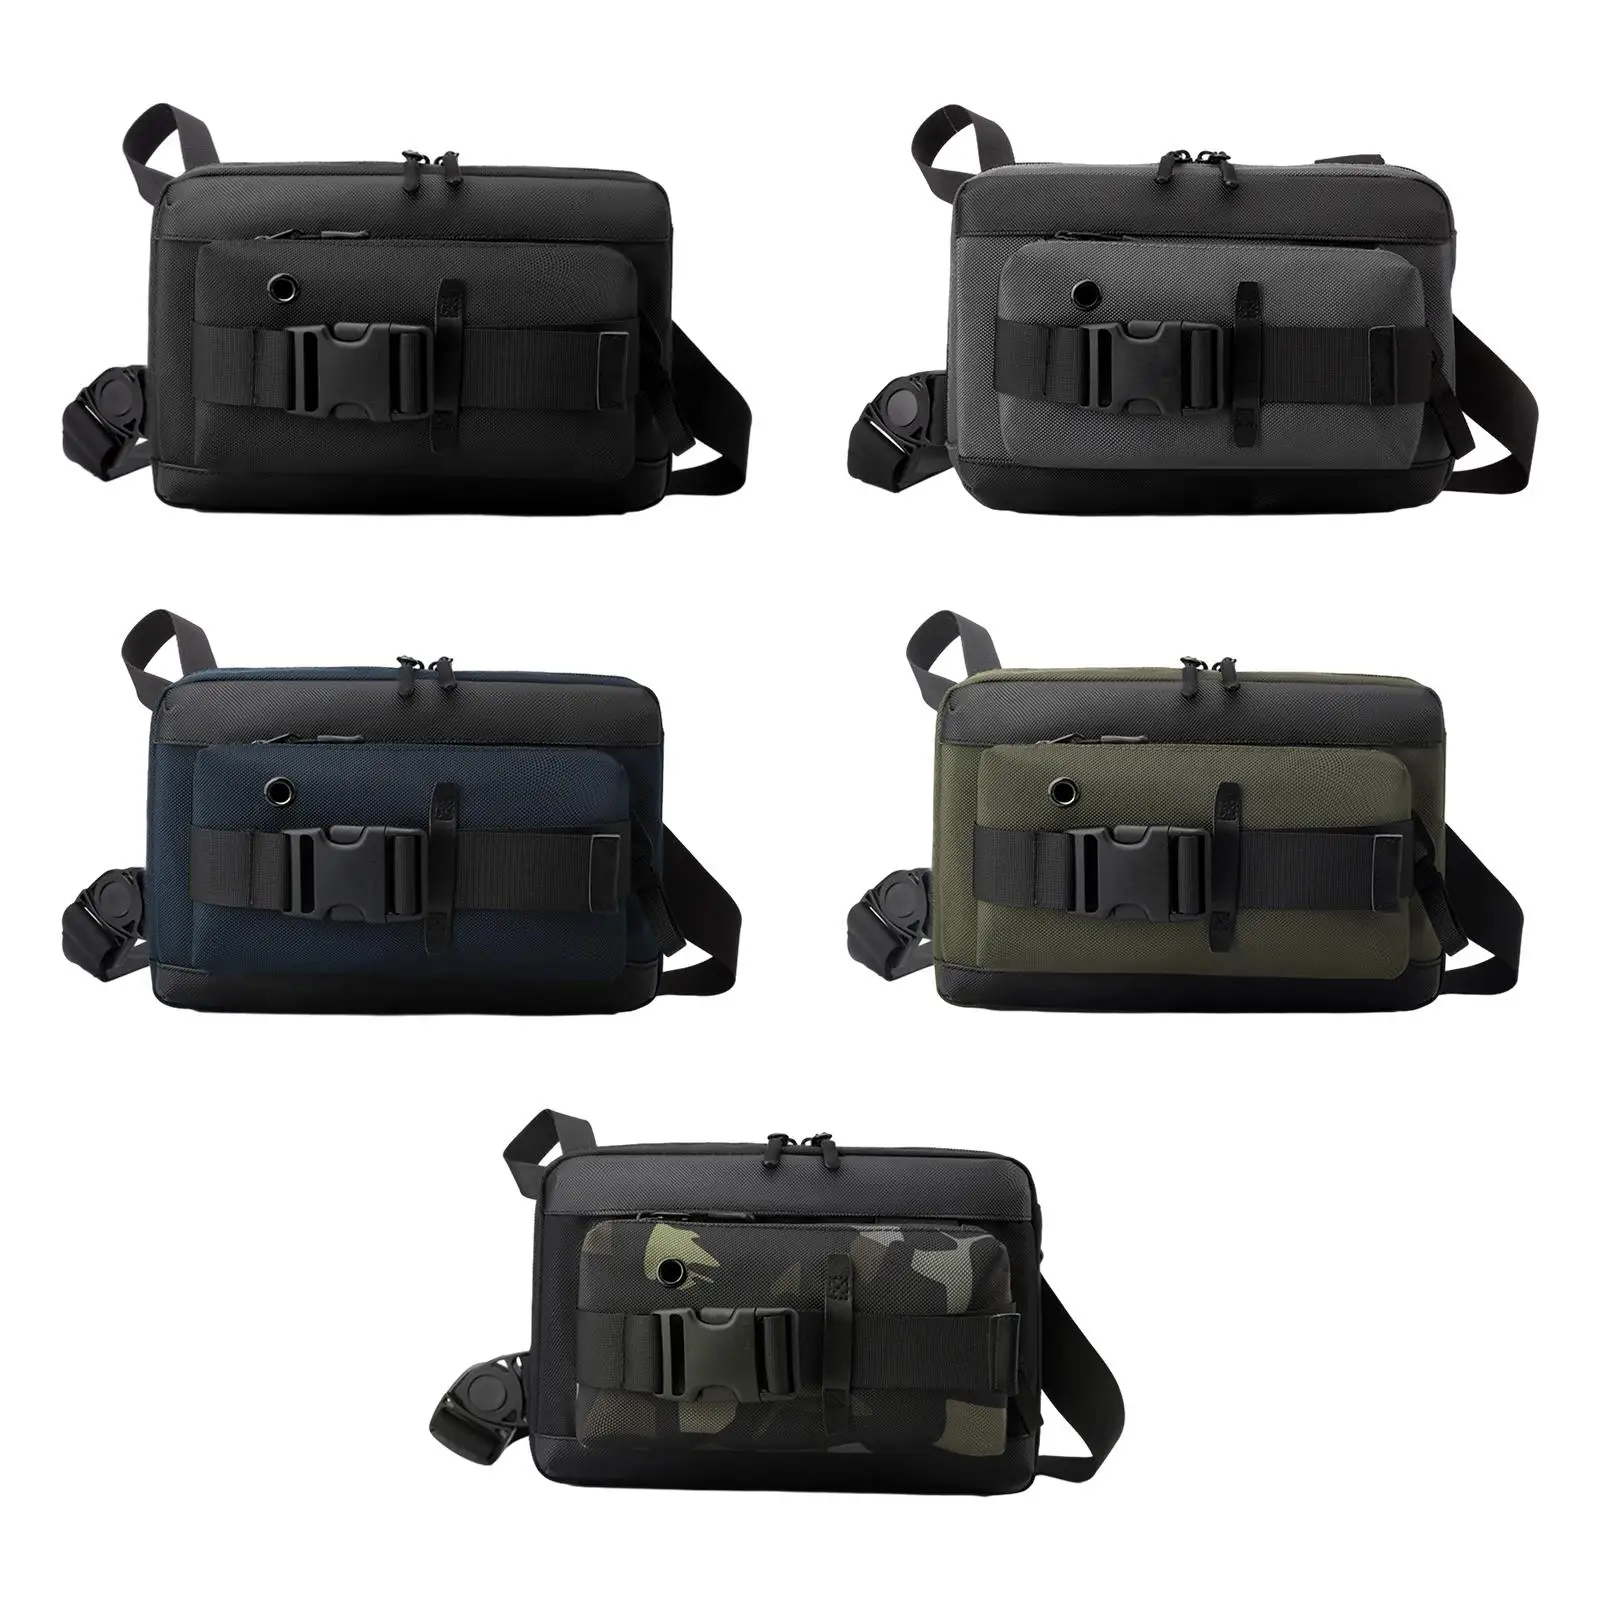 

Mens Chest Bag Fanny Pack Chest Pouch with Zipper Daypack Portable Crossbody Bag Shoulder Purse for Workout Walking Traveling